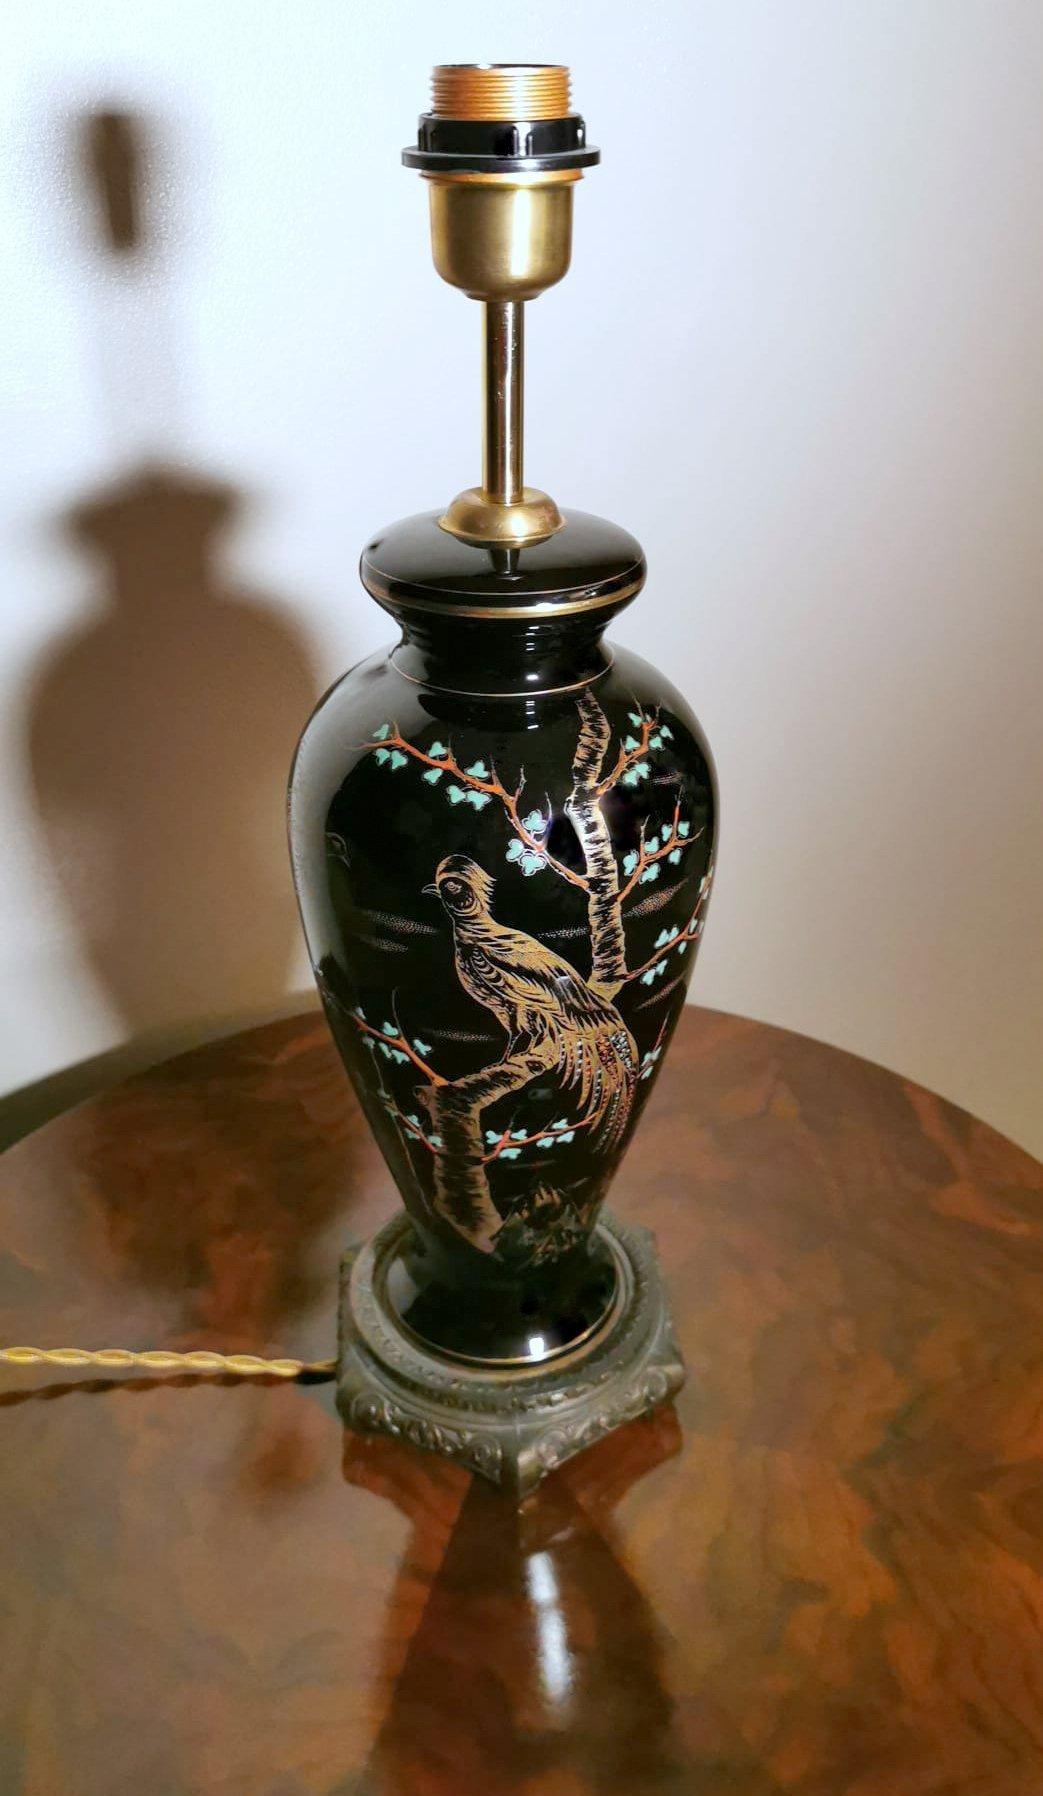 Porcelaine De Paris Rare French Lamp in Black Polished Porcelain Hand Painted In Good Condition For Sale In Prato, Tuscany